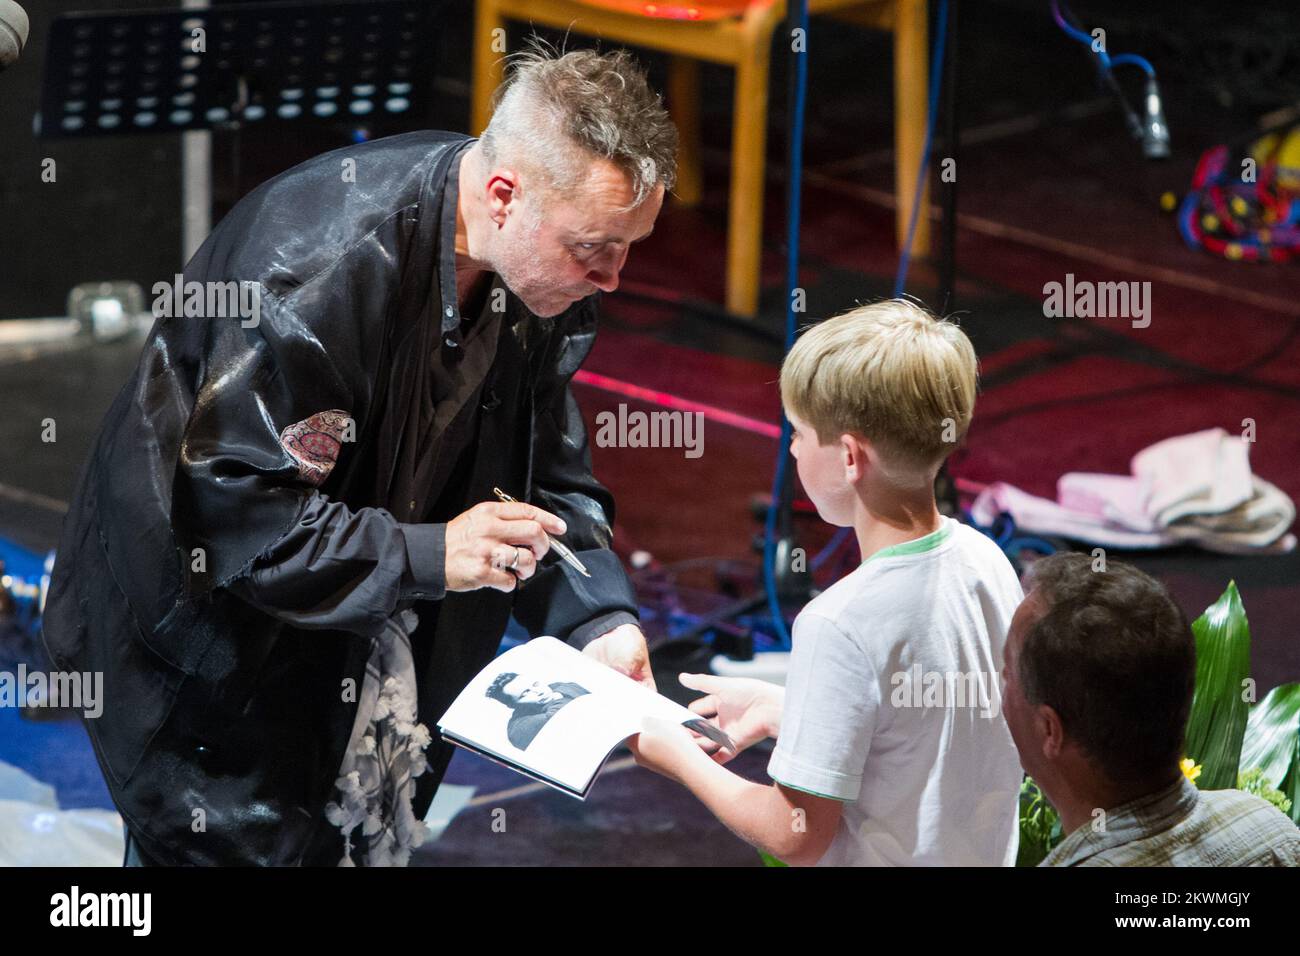 22.07.2012., Dubrovnik, Croatia - Nigel Kennedy, the leading violinist of the world for 25 years is one of the most talented musicians that Great Britain has ever had. Especially for this festival performance his jazz Nigel Kennedy Quintet performed an eclectic combination of Kennedy's songs and selection of jazz standards and processing. Photo: Grgo Jelavic/PIXSELL  Stock Photo